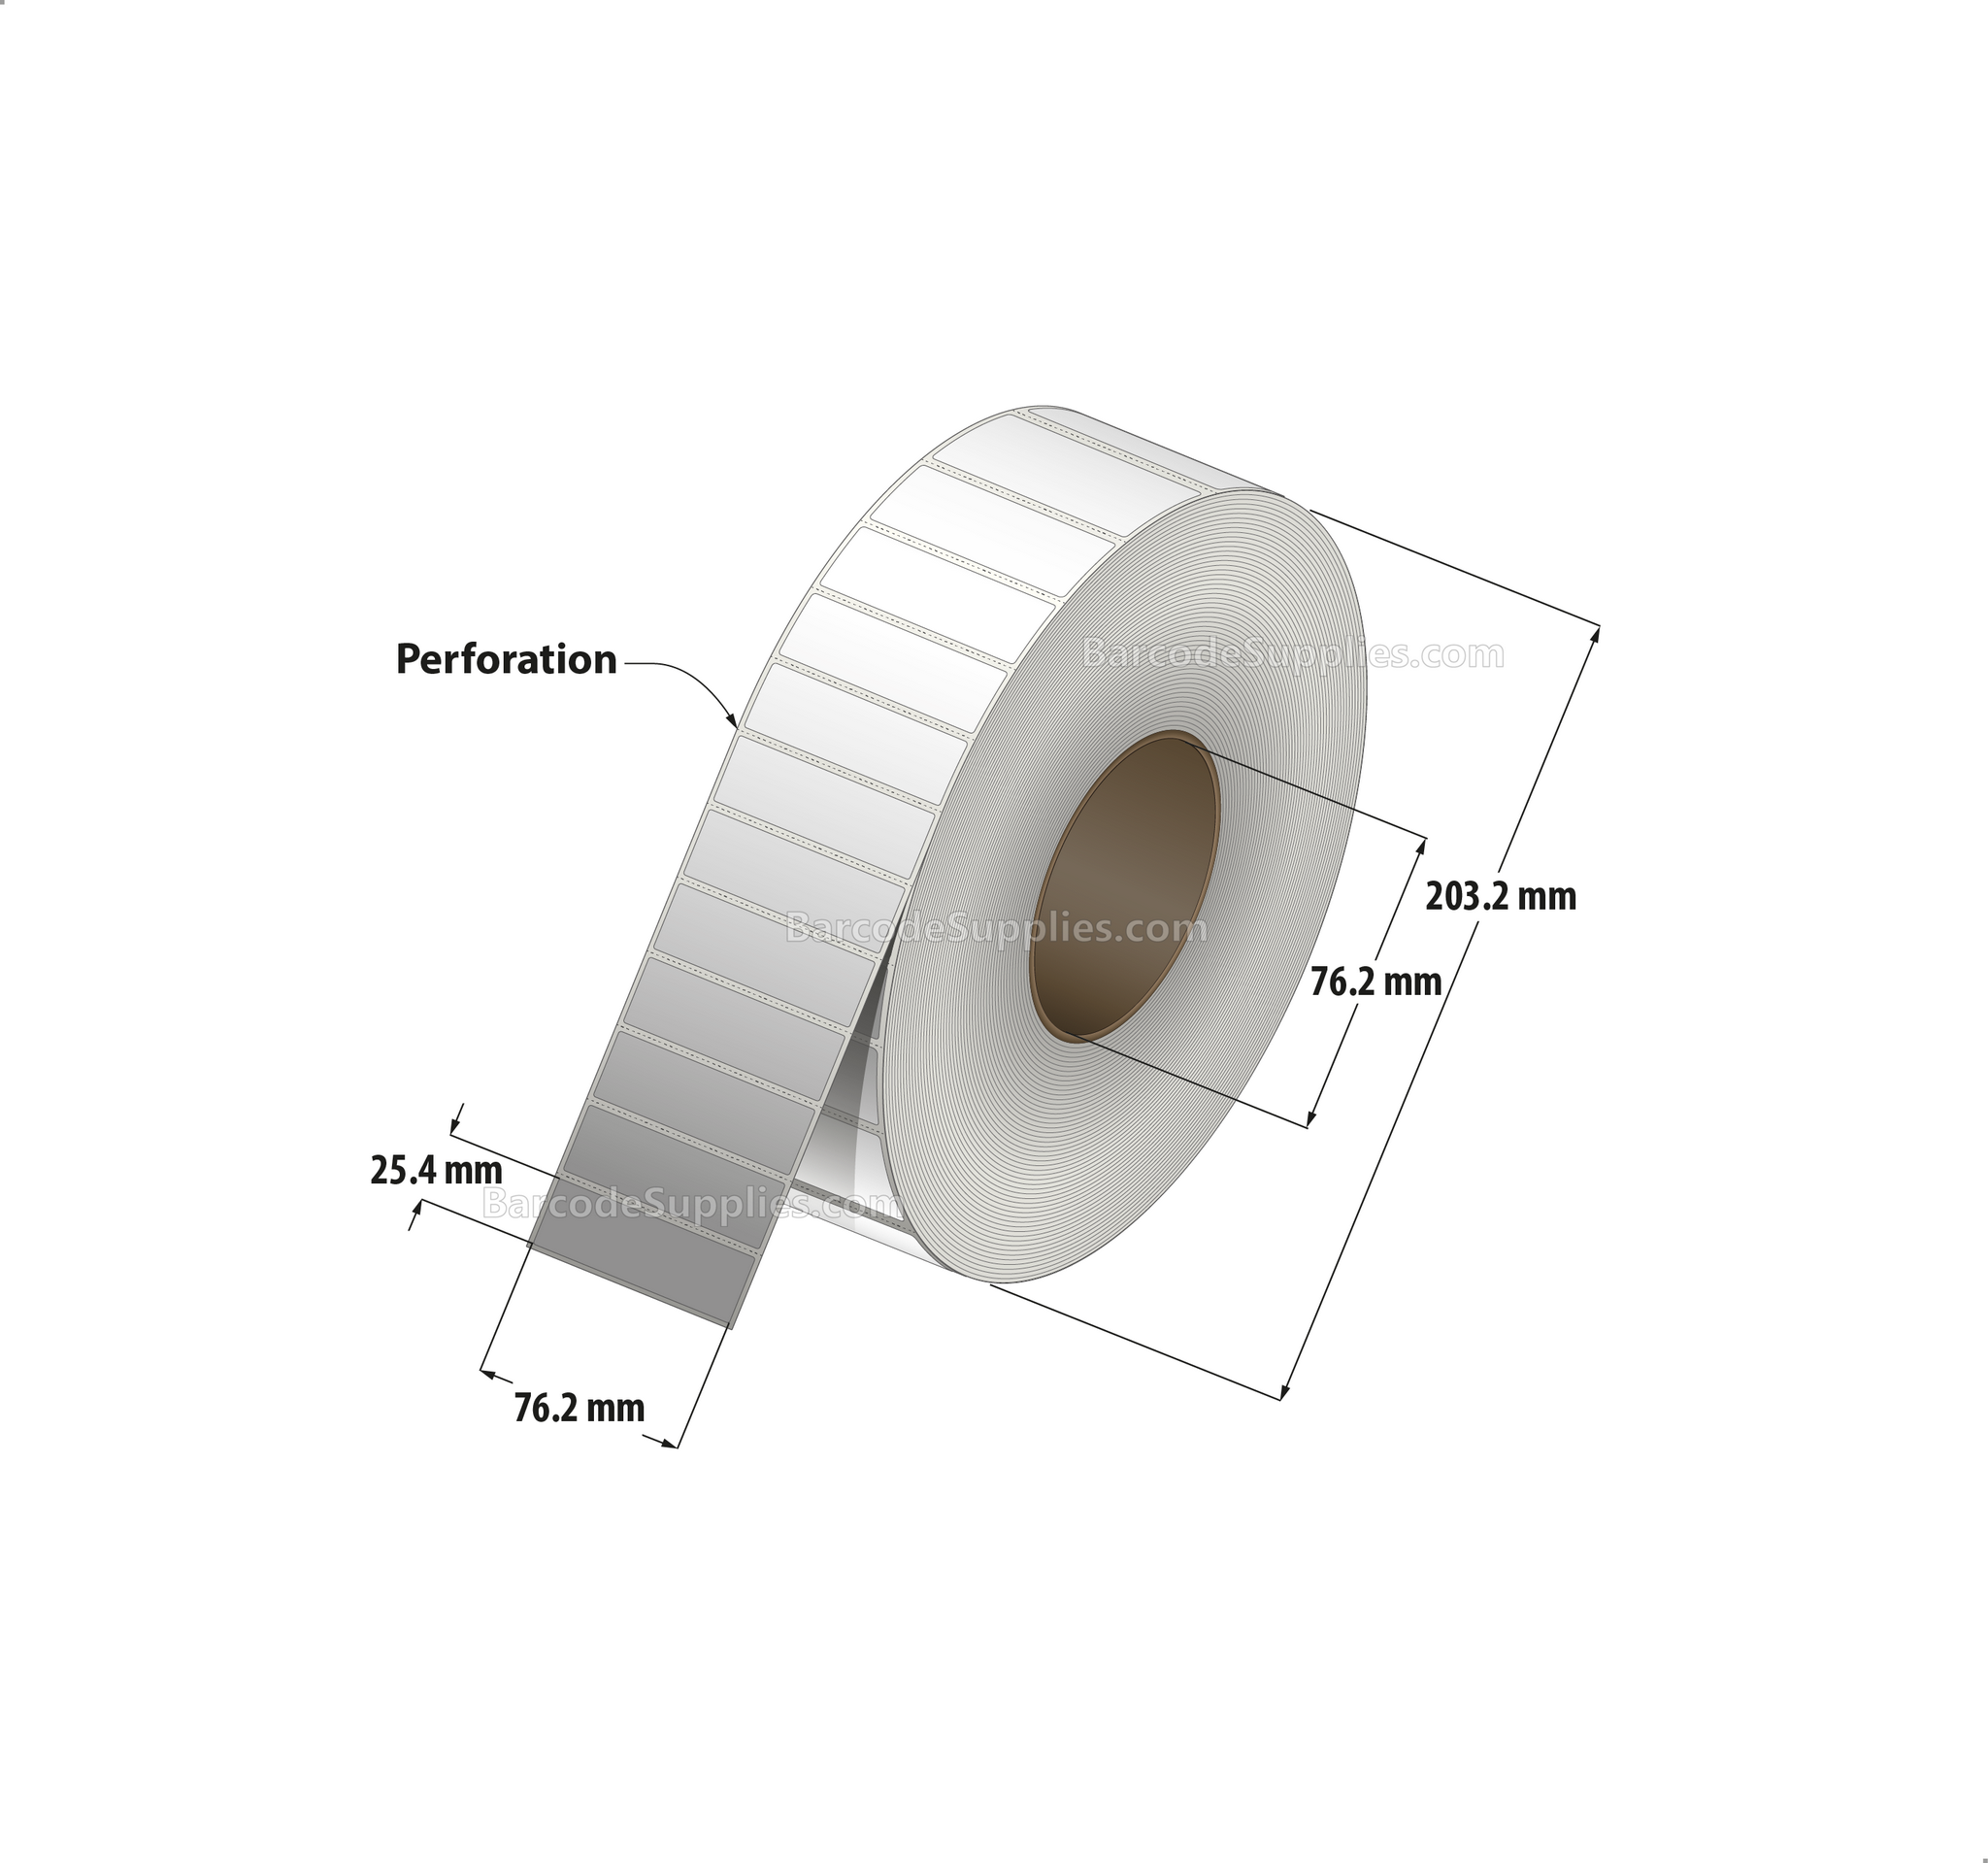 3 x 1 Direct Thermal White Labels With Acrylic Adhesive - Perforated - 5500 Labels Per Roll - Carton Of 8 Rolls - 44000 Labels Total - MPN: RD-3-1-5500-3 - BarcodeSource, Inc.